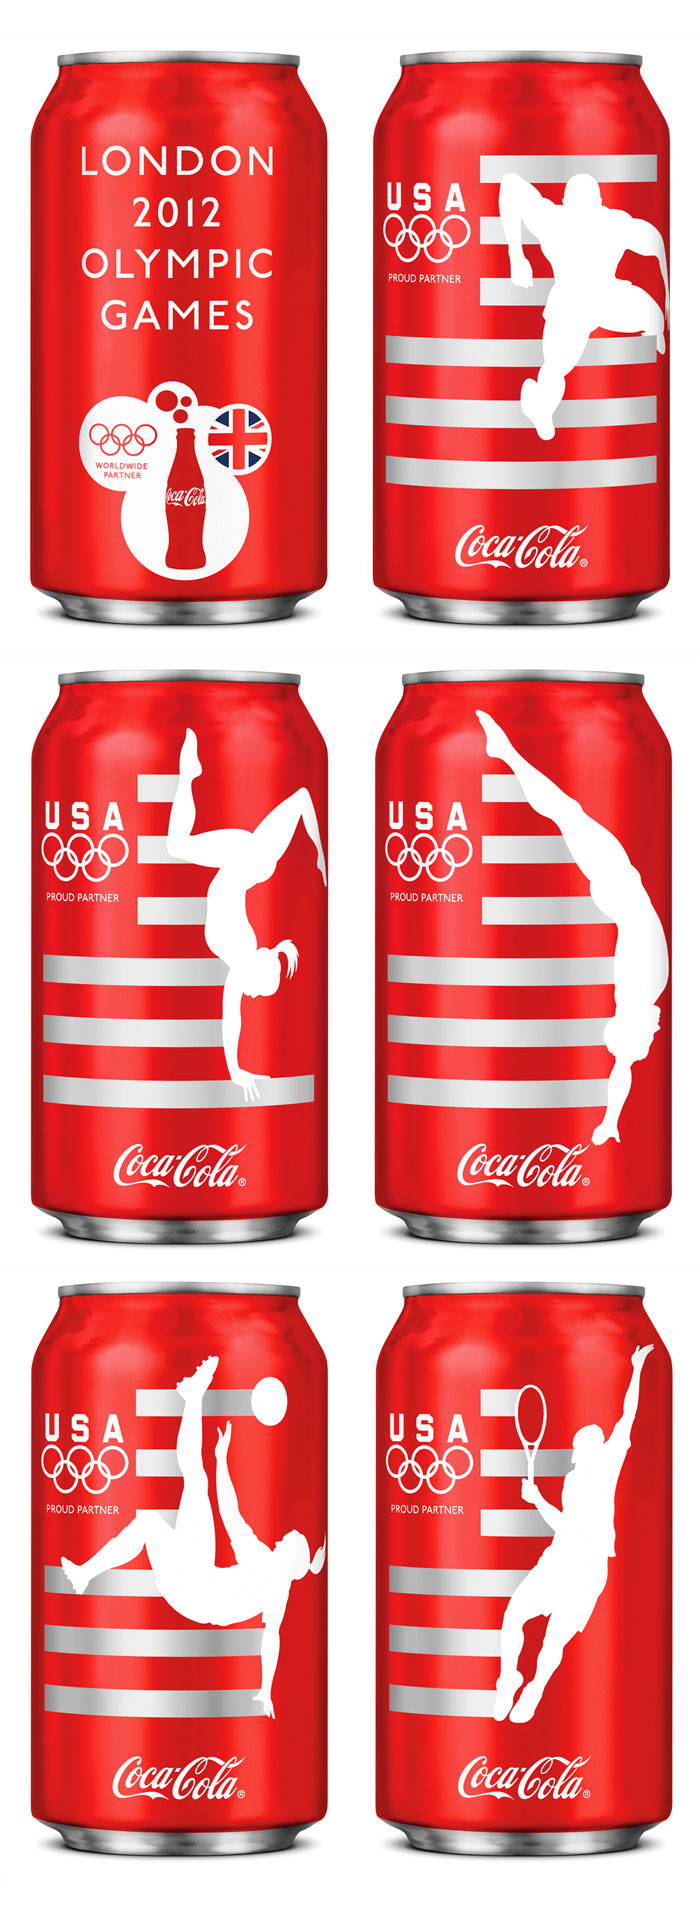 2012 Olympics Coca Cola limited edition cans by Darren Whittington